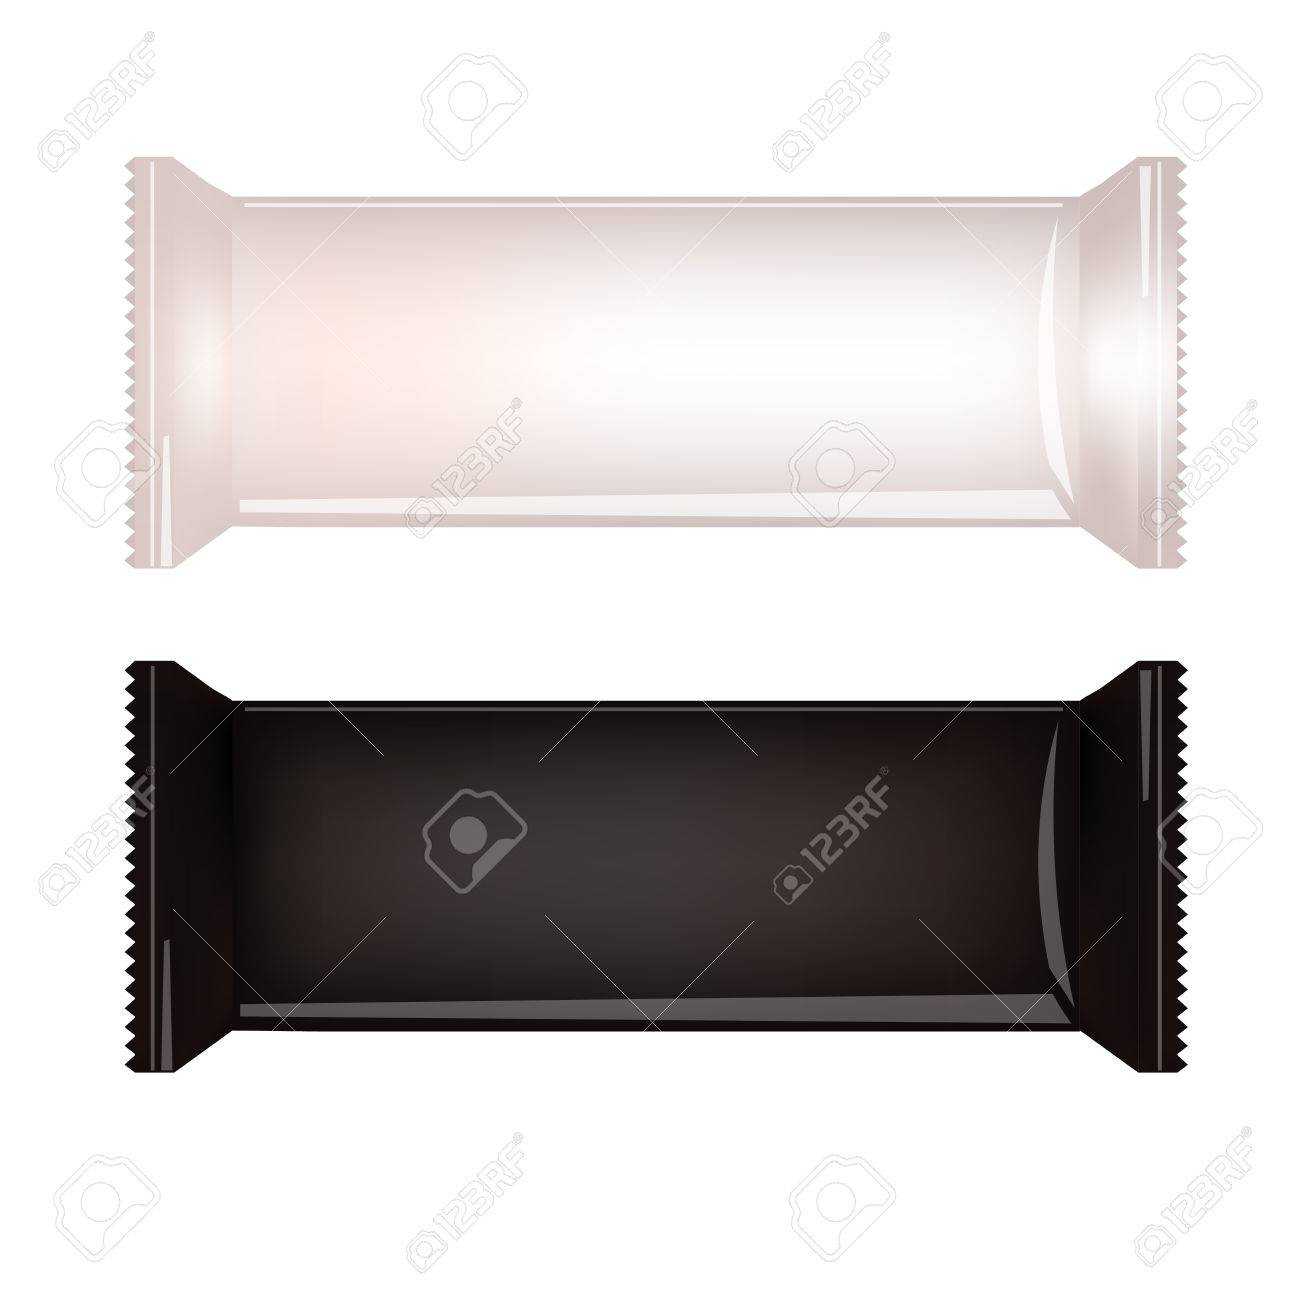 White And Black Blank Food Packaging For Biscuit, Wafer, Crackers,.. Inside Blank Candy Bar Wrapper Template